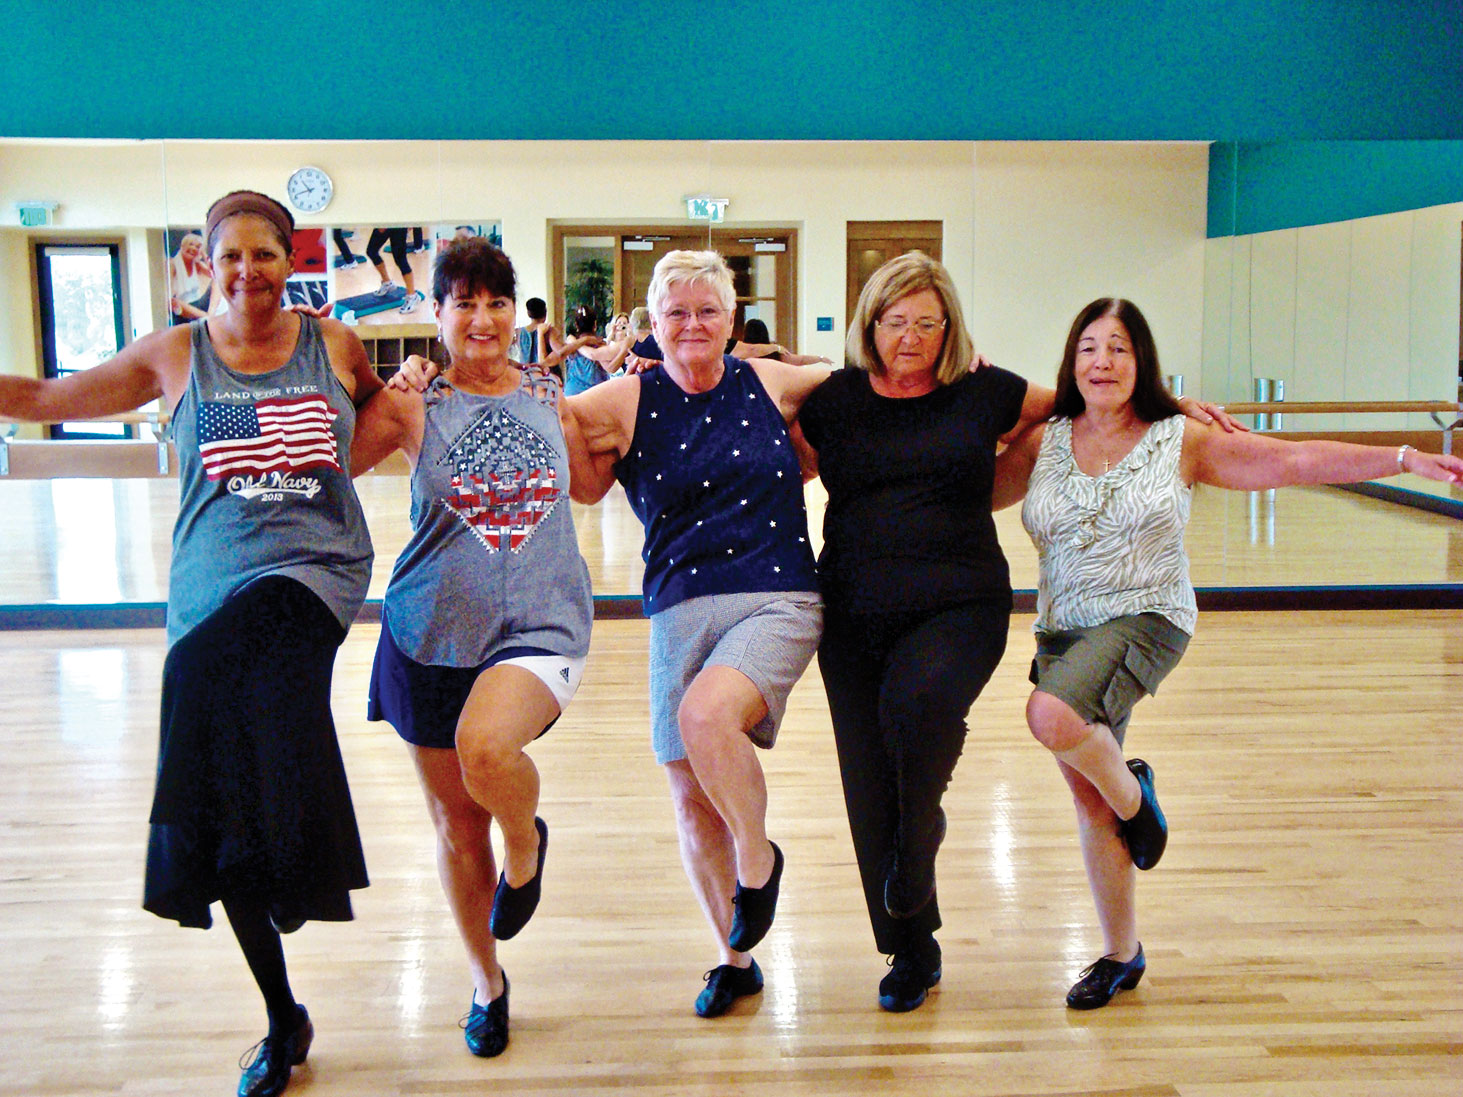 The nuns of Nunsense practice their steps. Left to right: Alice Lewis, Pat Ingalls, Judi Alonzo, Kathy Mitchell and Patrice Cole